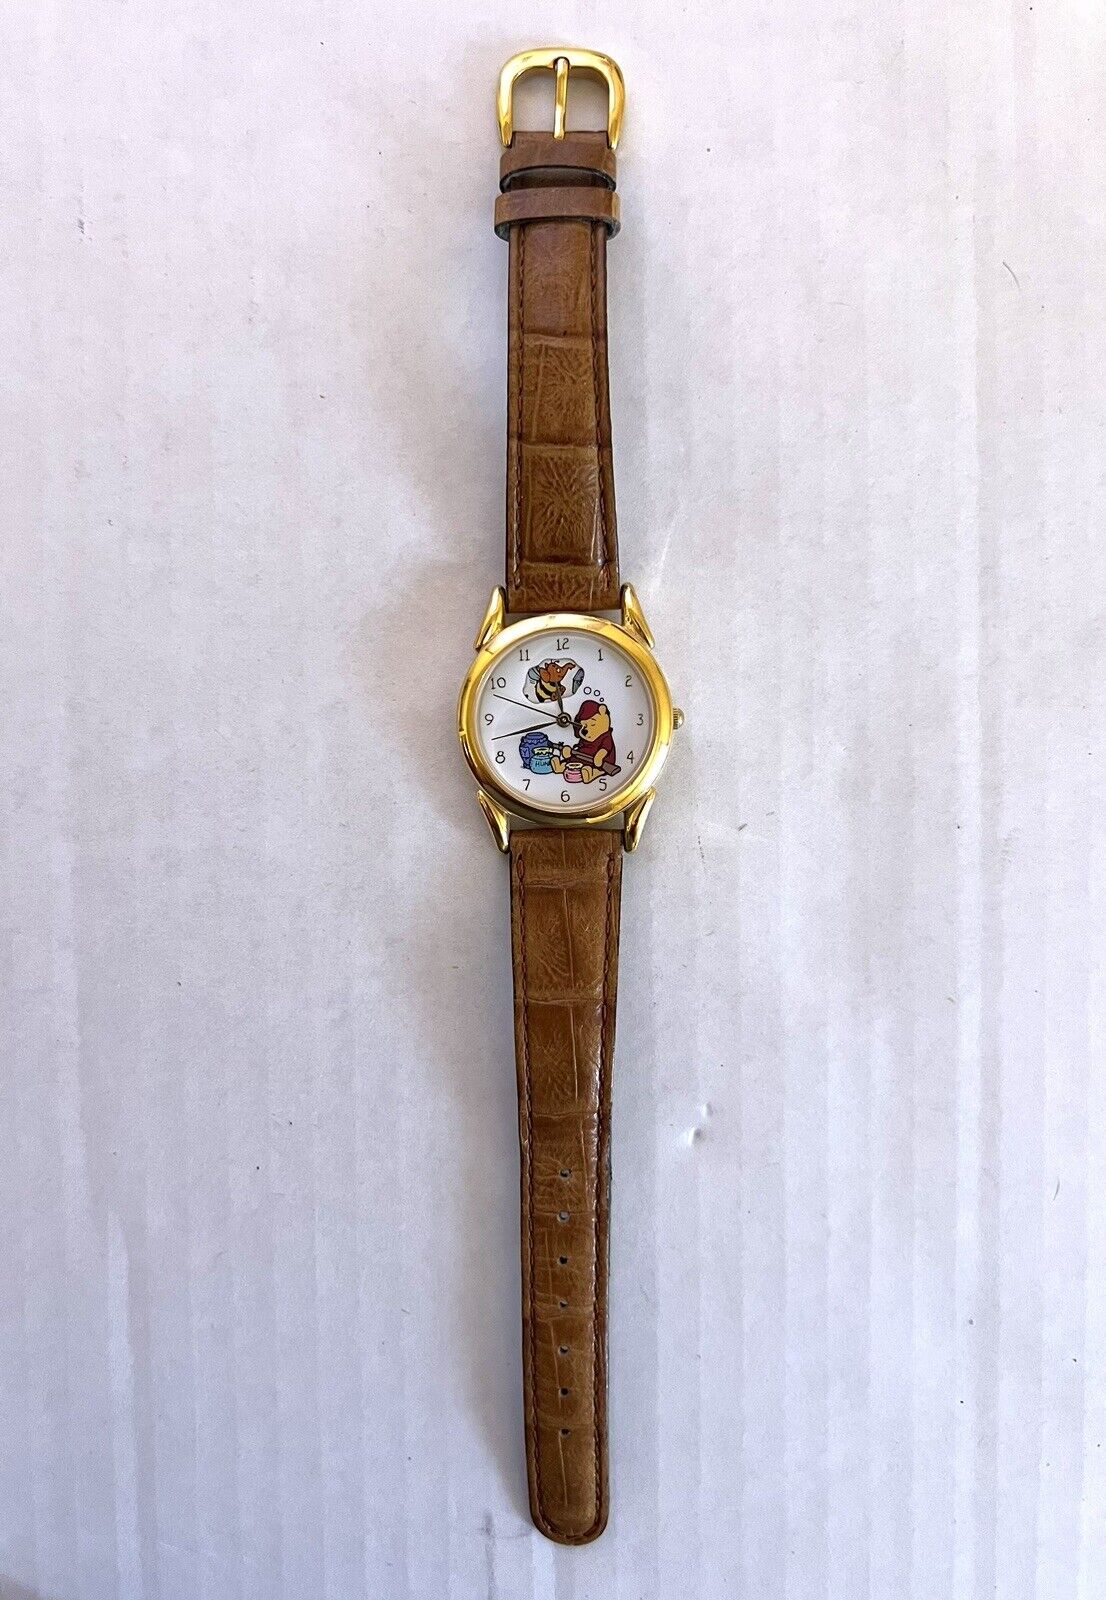 VINTAGE THE DISNEY STORE WINNIE THE POOH WATCH WITH ROTATING CHARACTERS